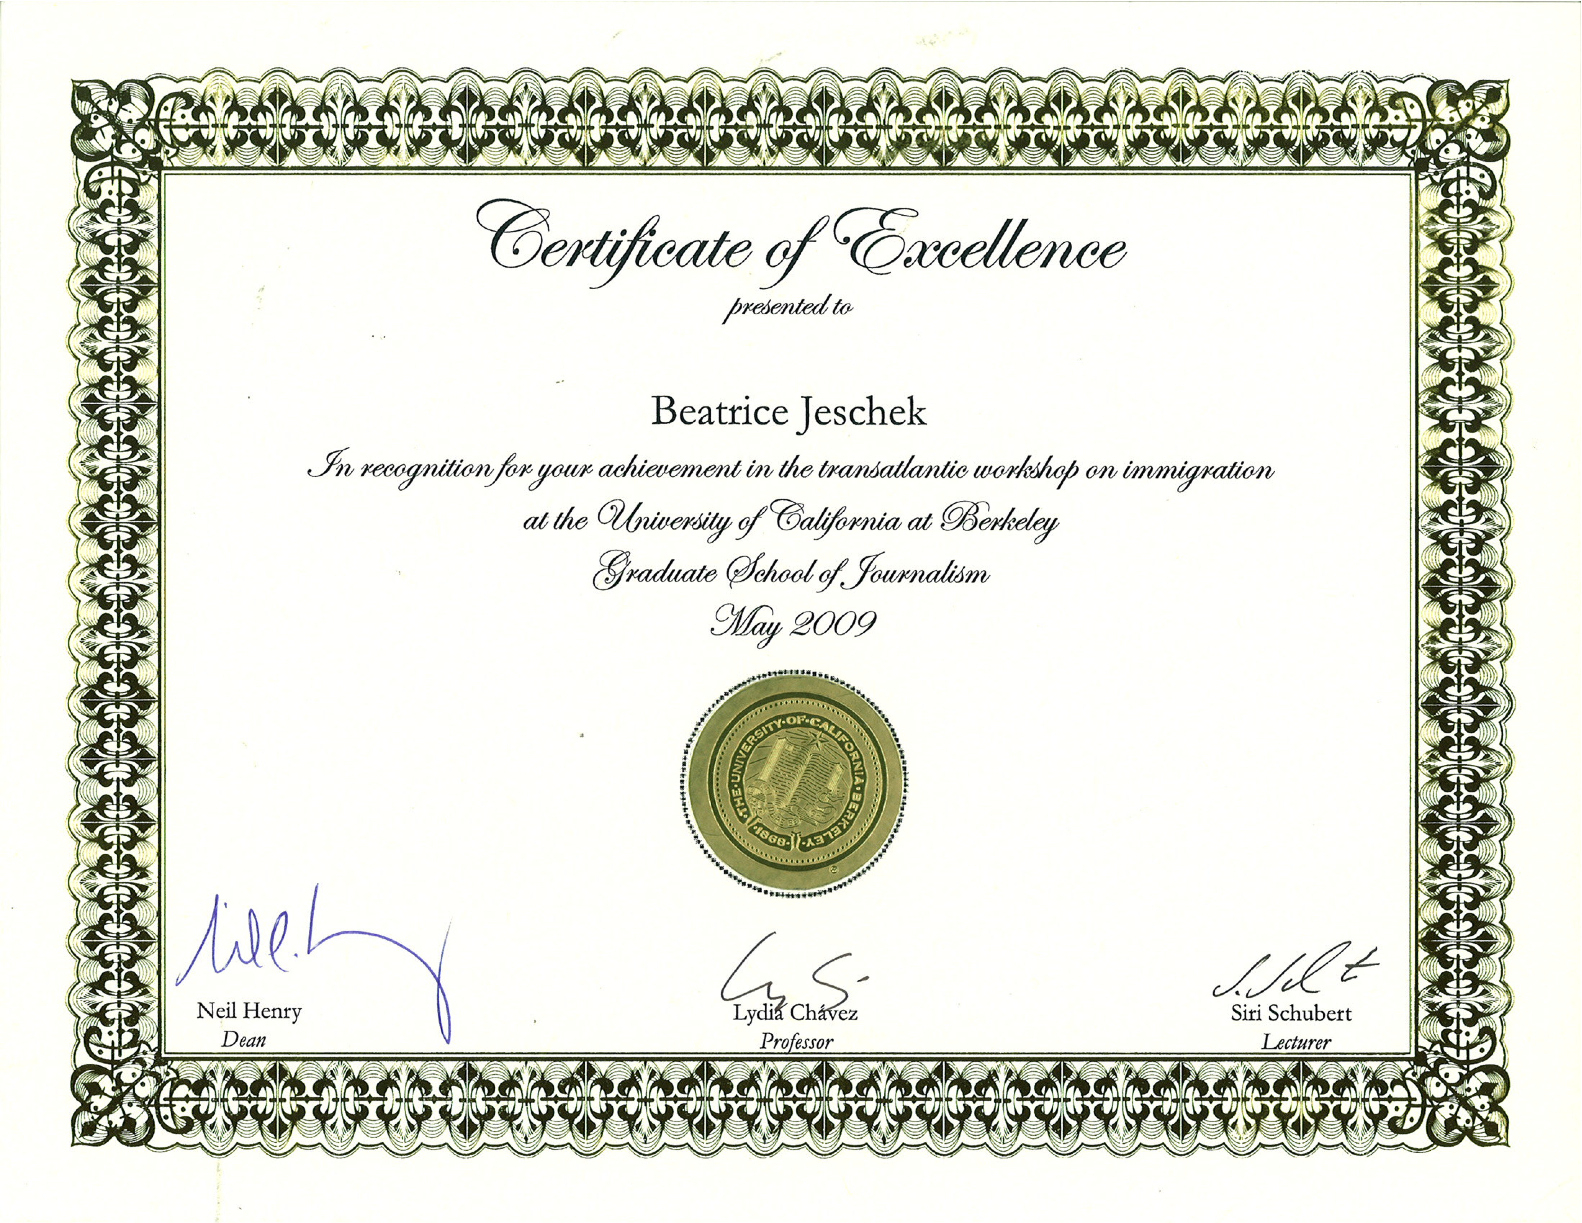 Beatrice Barnwell (Jeschek): Berkeley Certificate Of Excellence intended for Academic Excellence Certificate